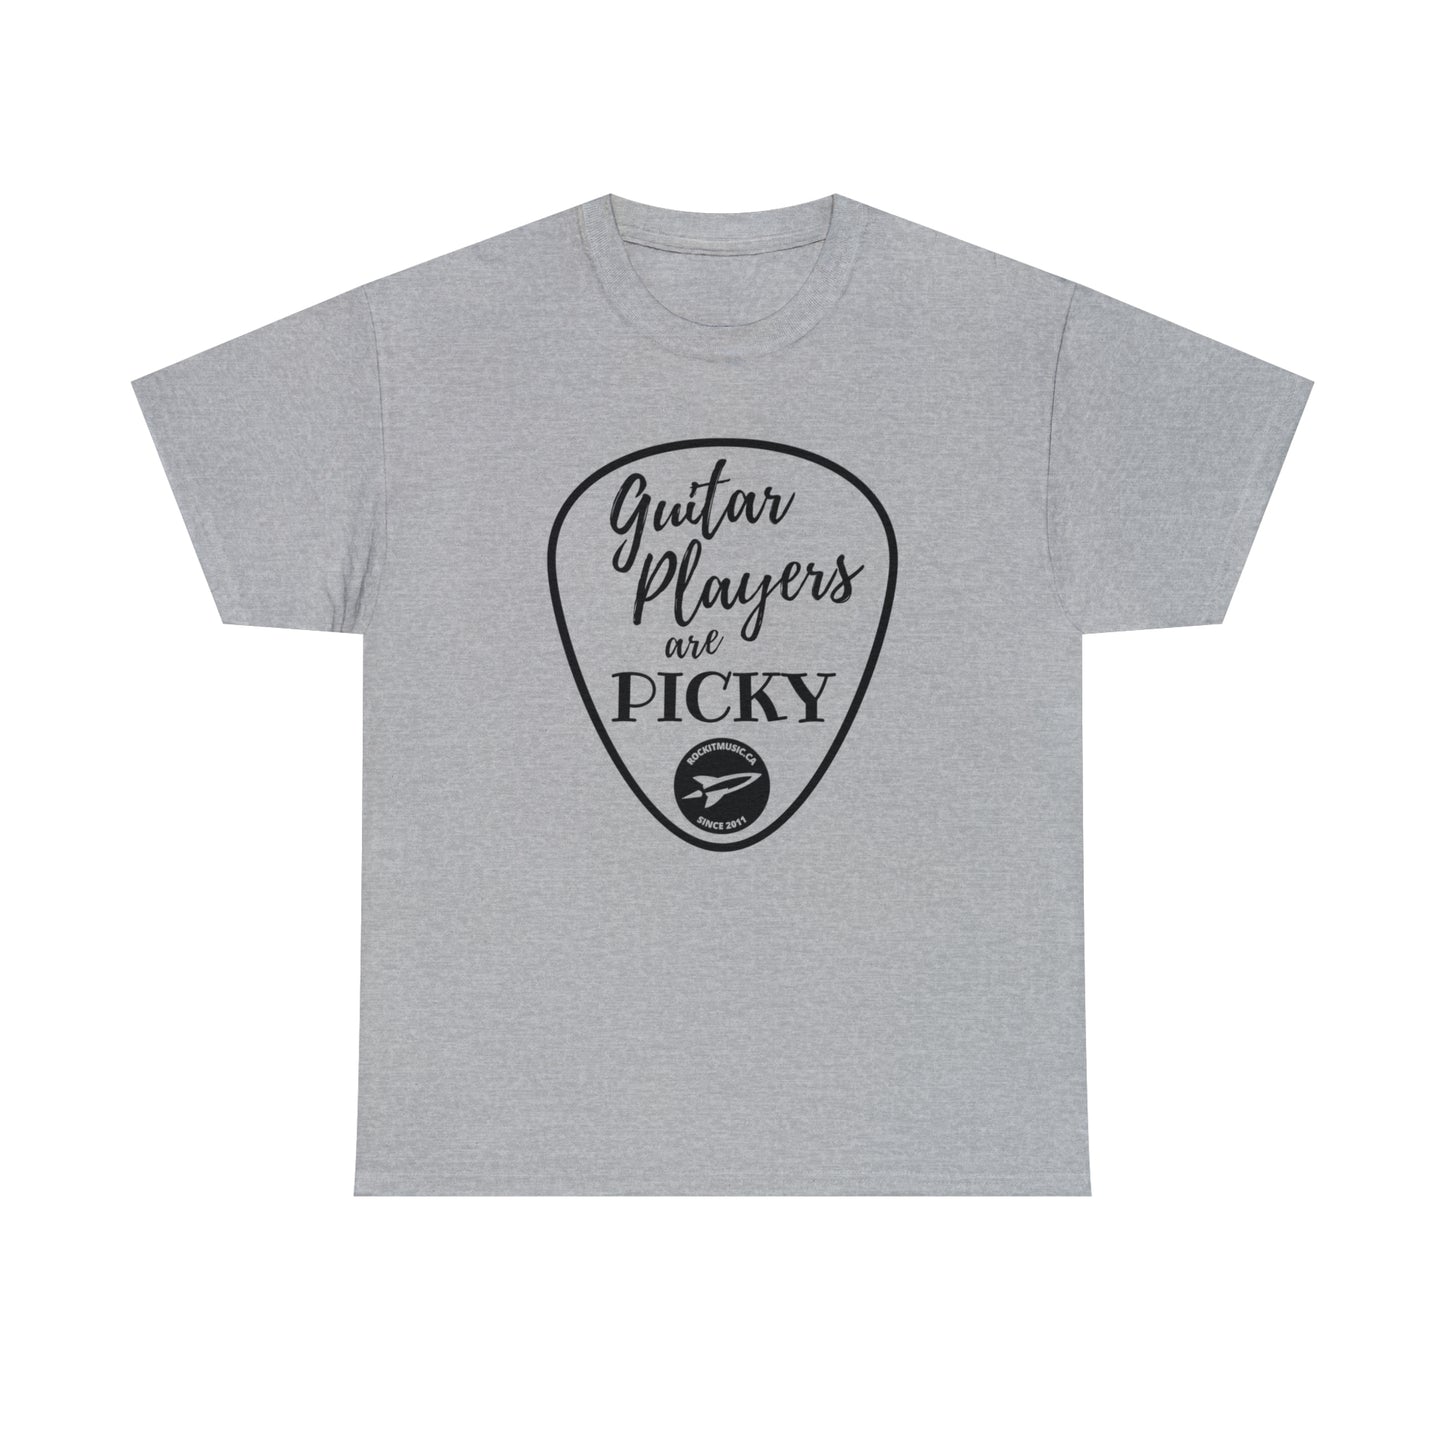 Rockit T-Shirt - Guitar Players are Picky